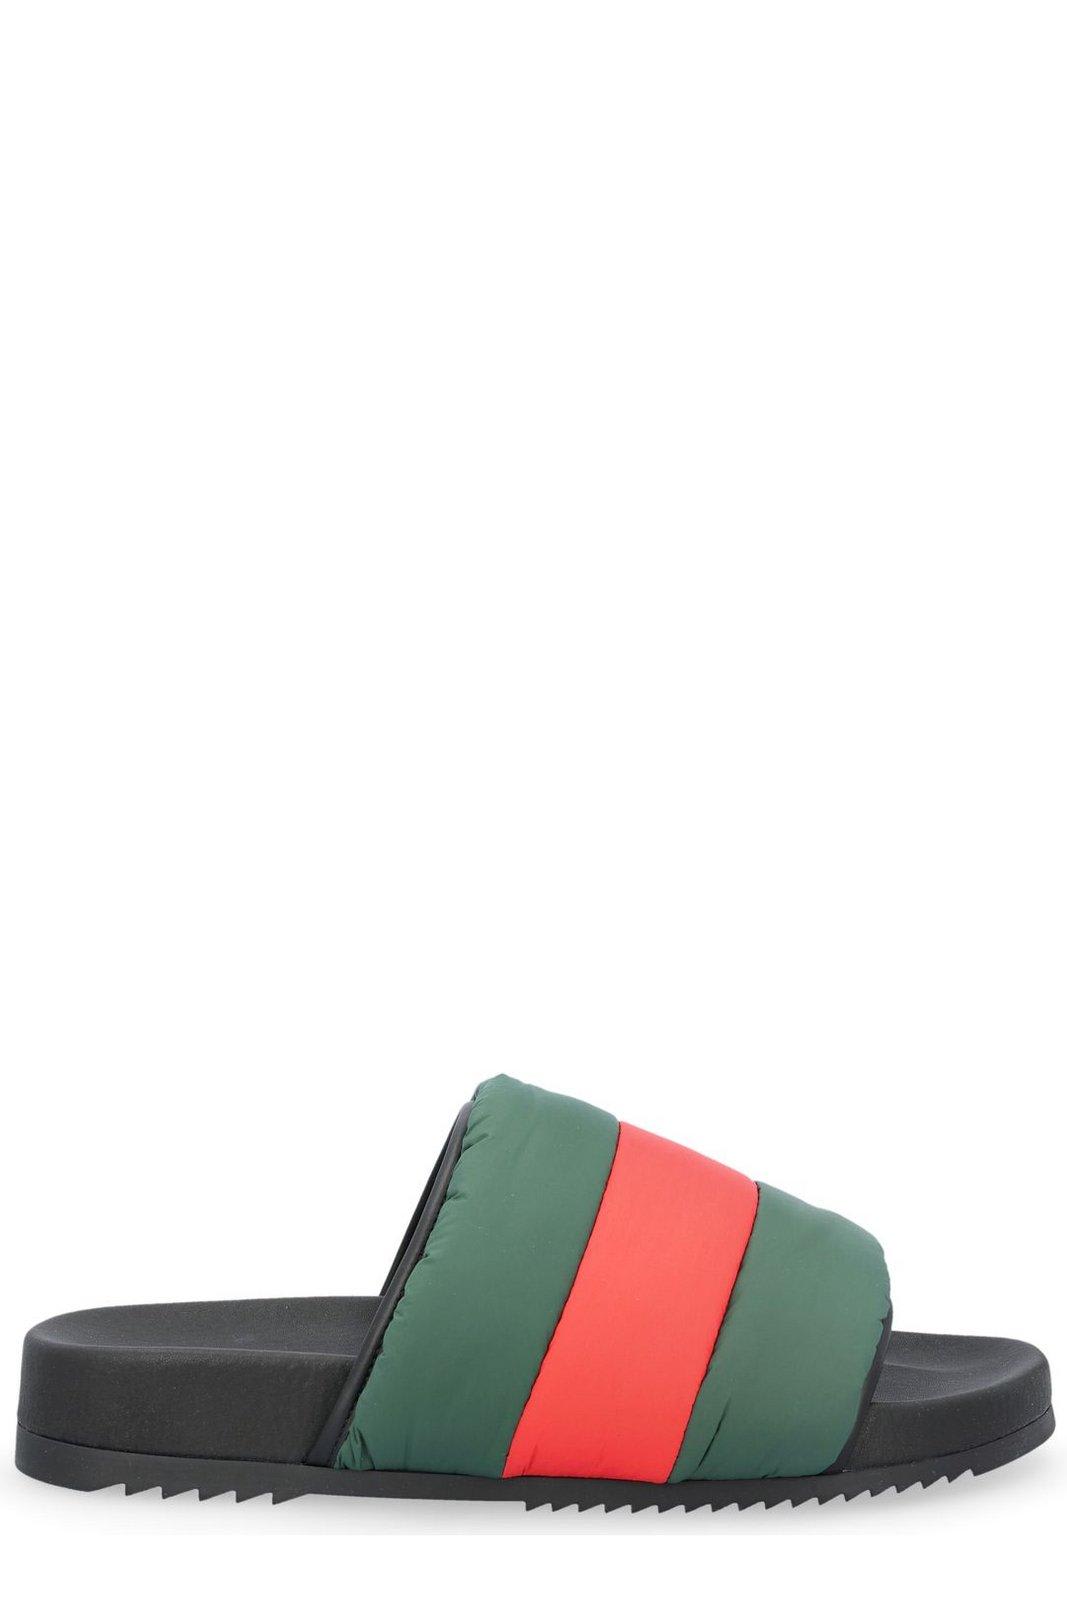 Shop Gucci Padded Web Slide Sandals In Nero